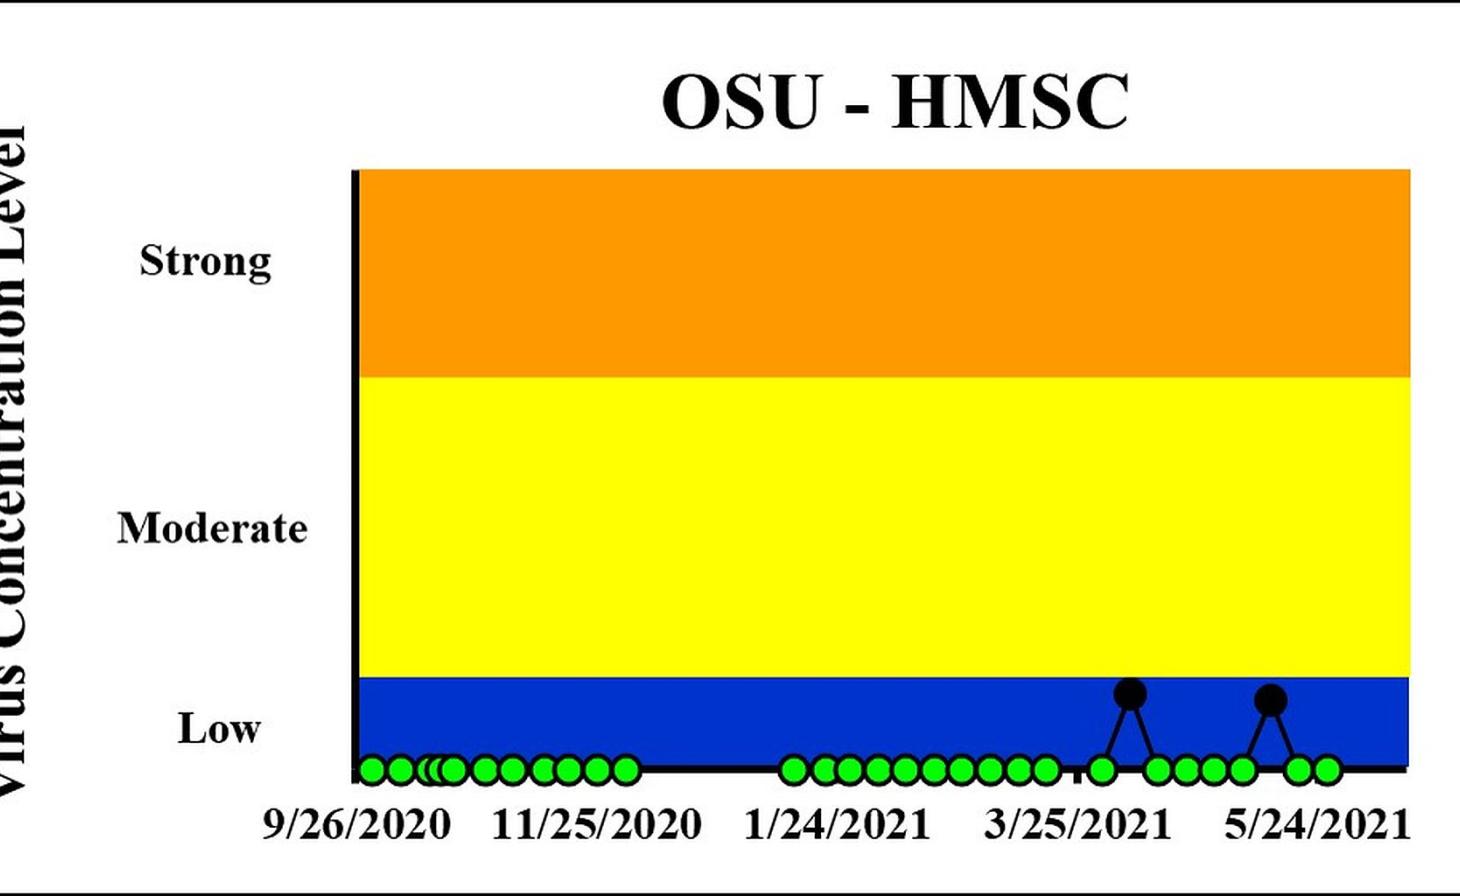 The concentration on the most recent sampling dates (5/19/2021 and 5/26/2021) indicated a viral load below the detection limit at Hatfield Marine Science Center